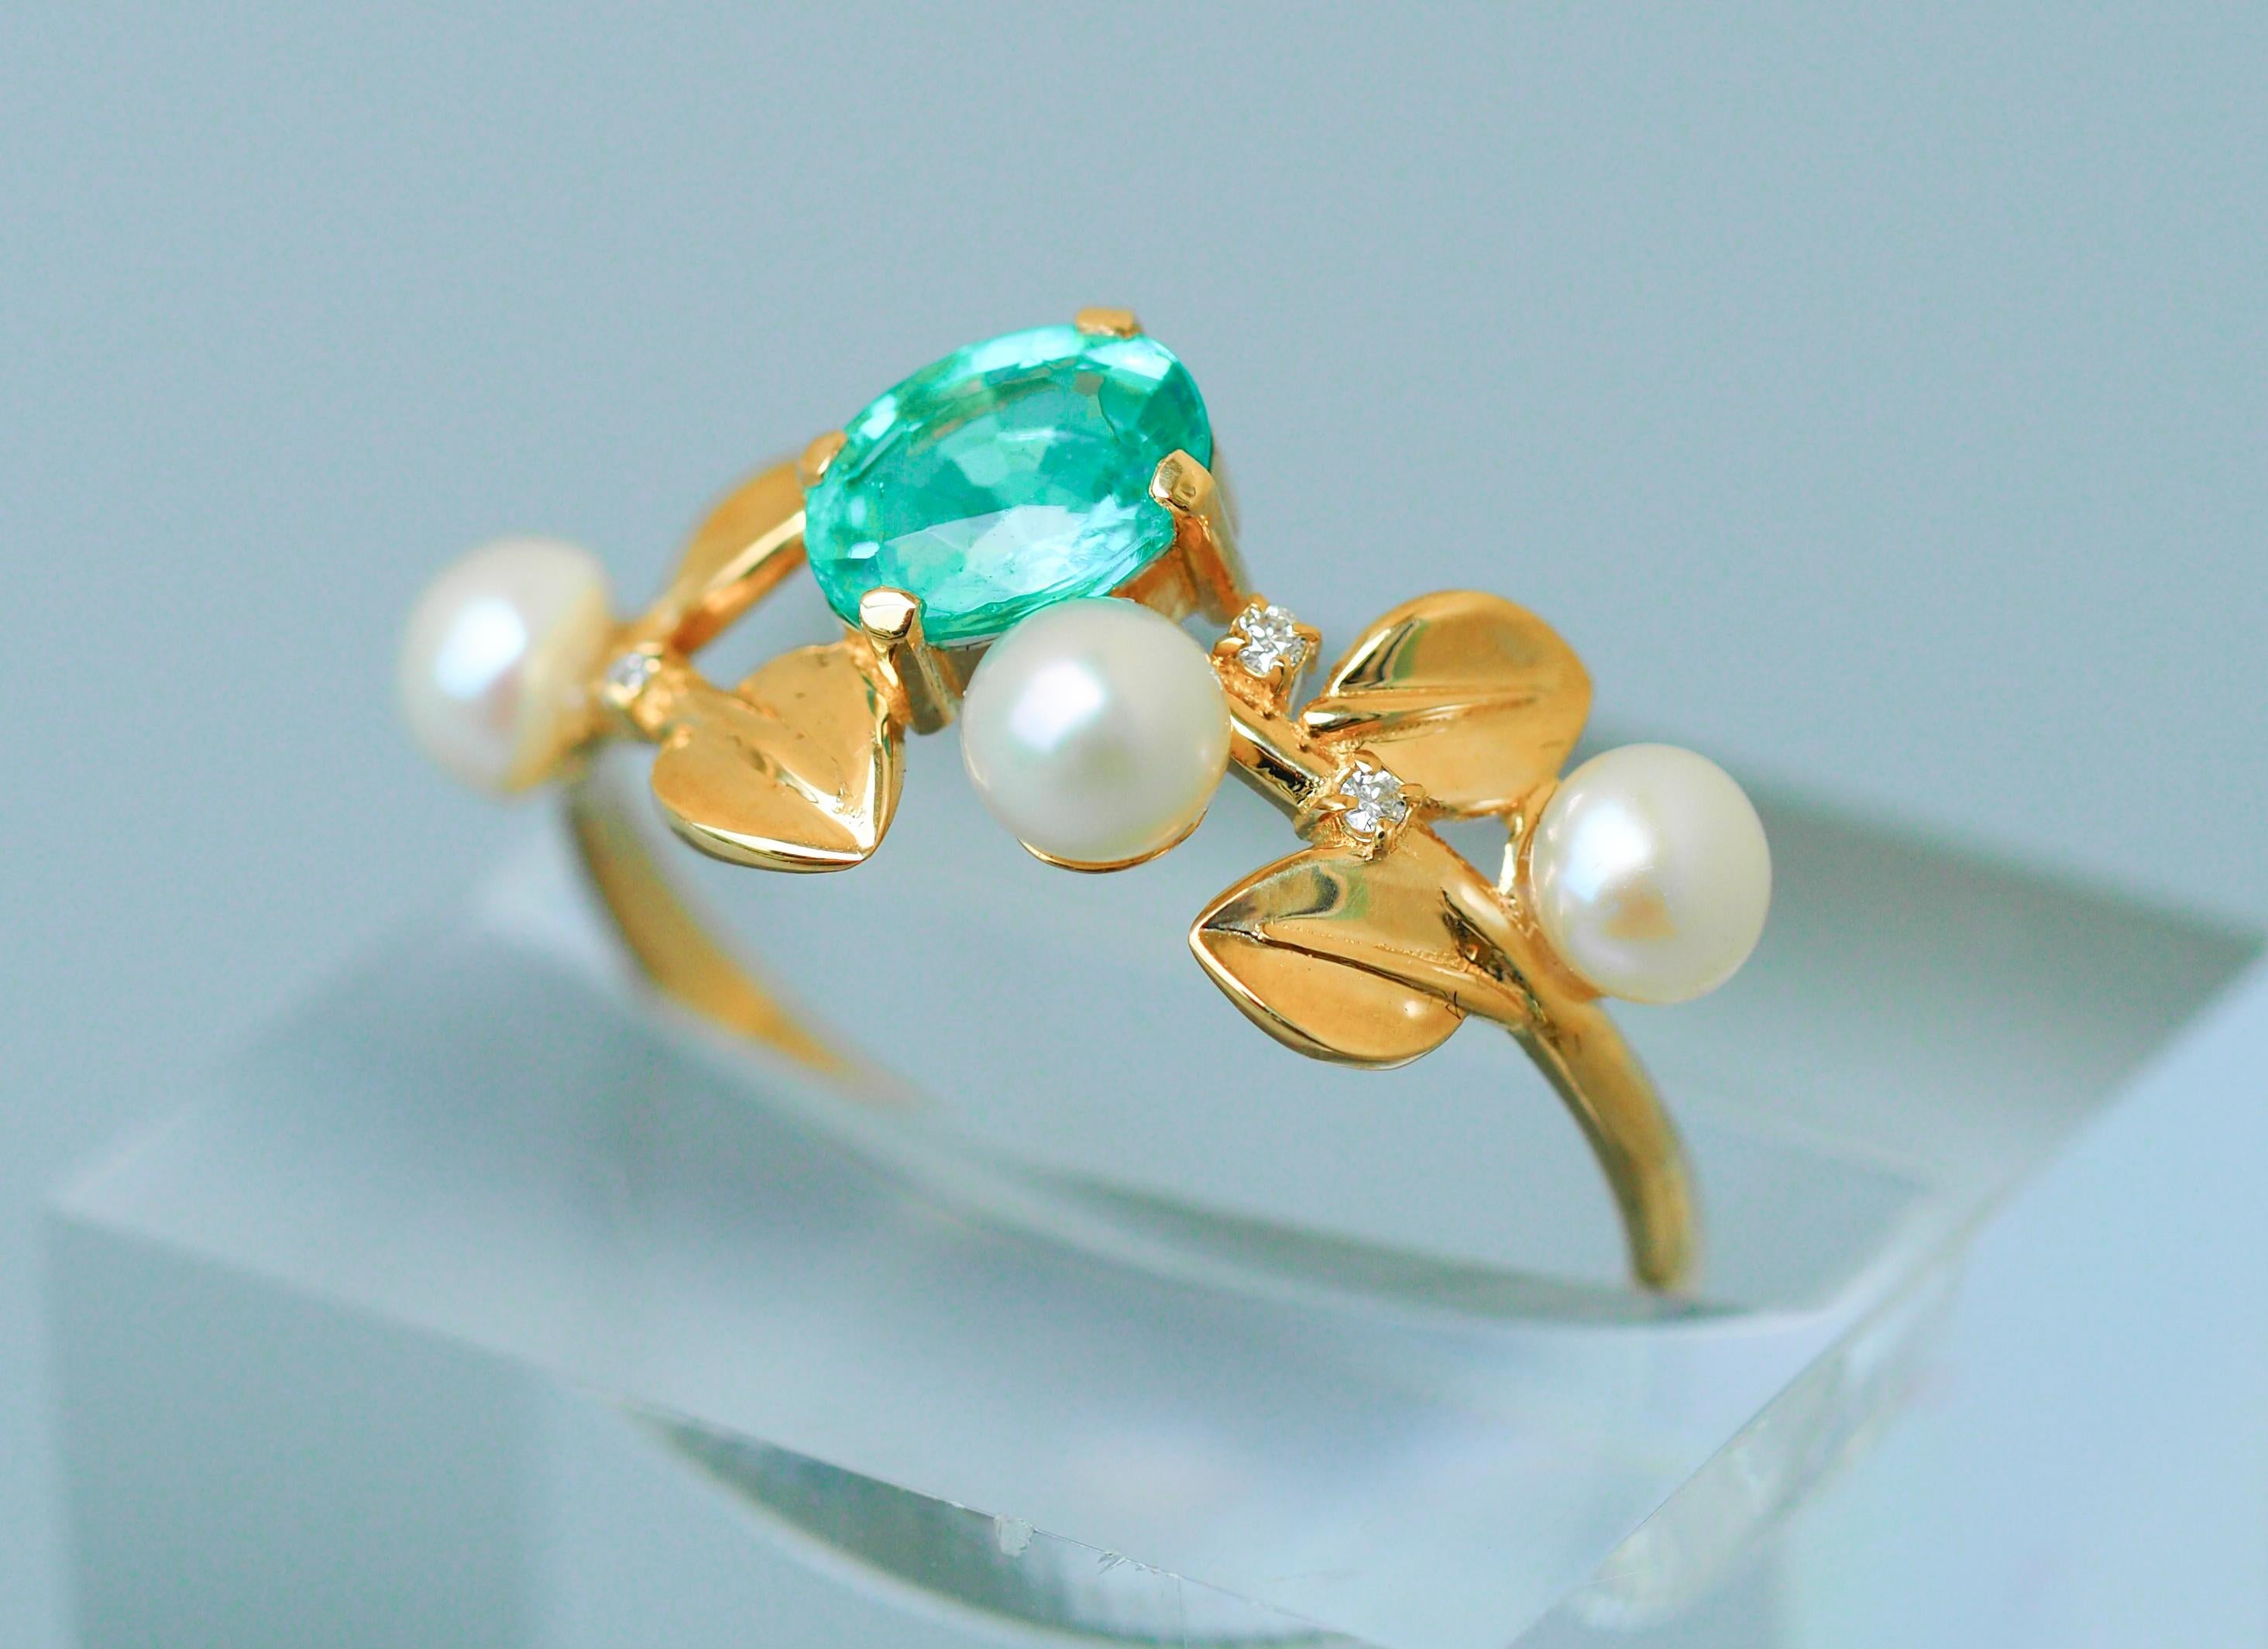 Modern 14k Gold Floral Ring with Oval Apatite, Diamonds and Pearls